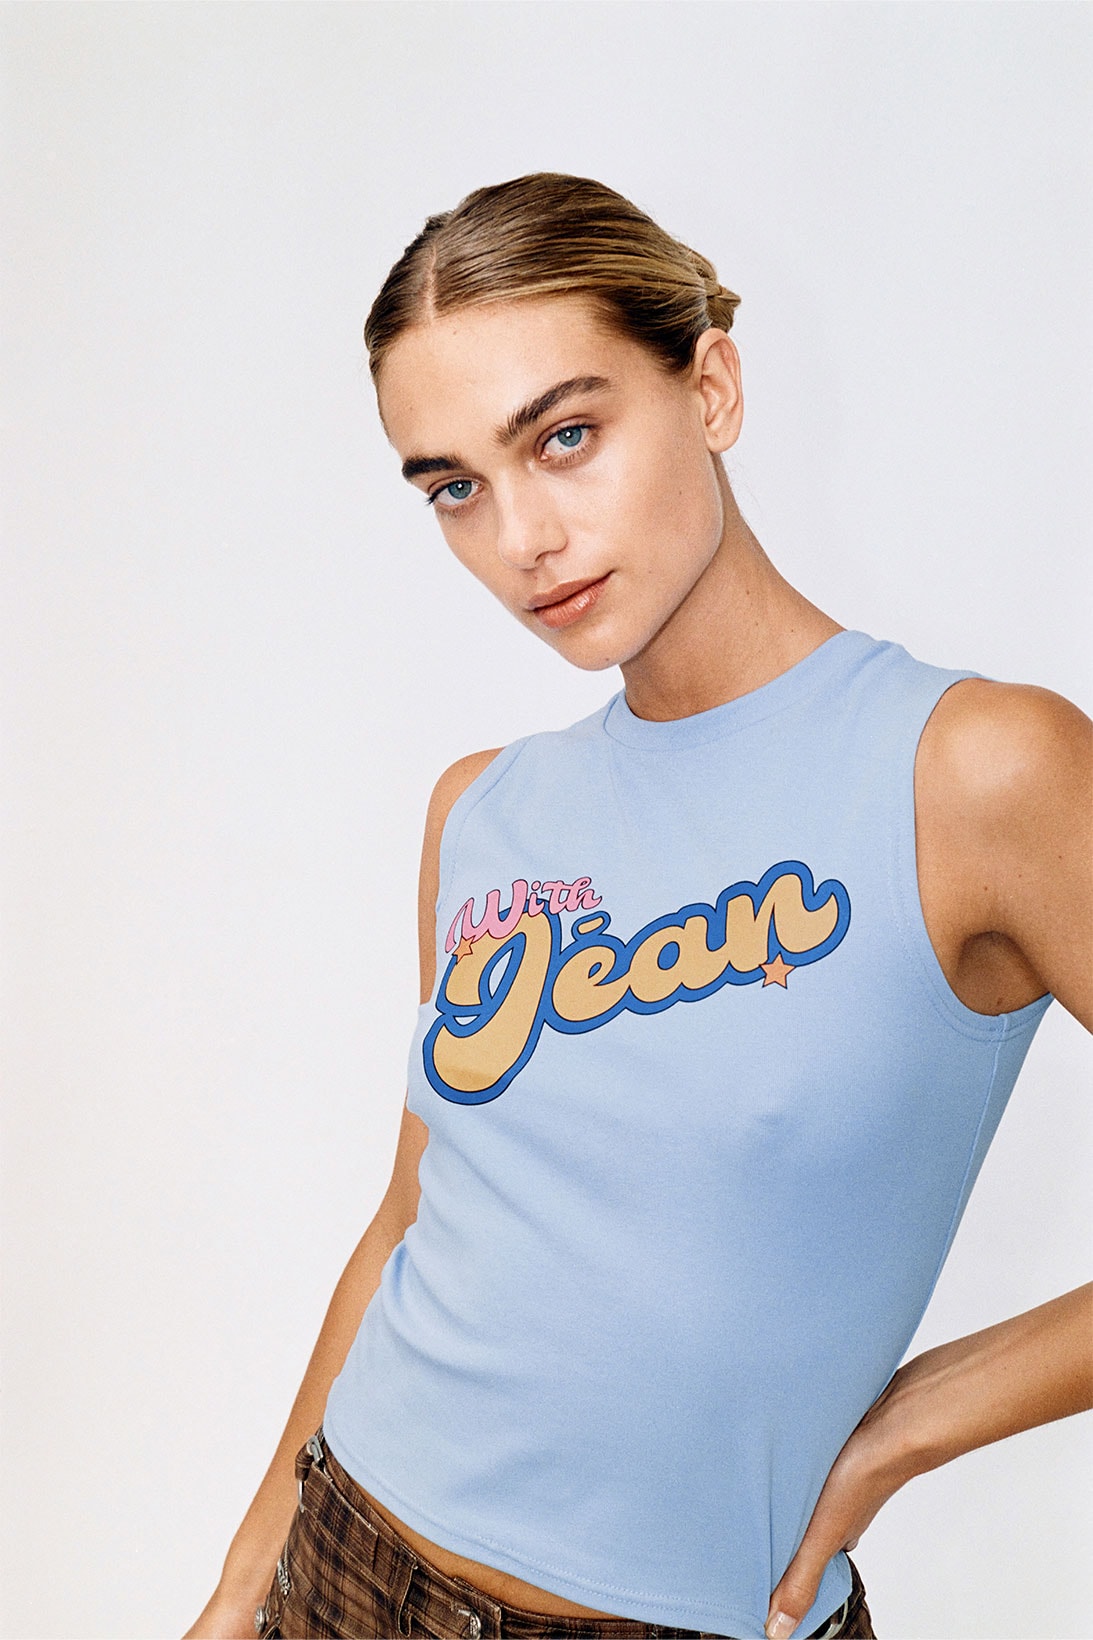 With Jean Tee Shirt Collection Tank Tops Release Where to buy